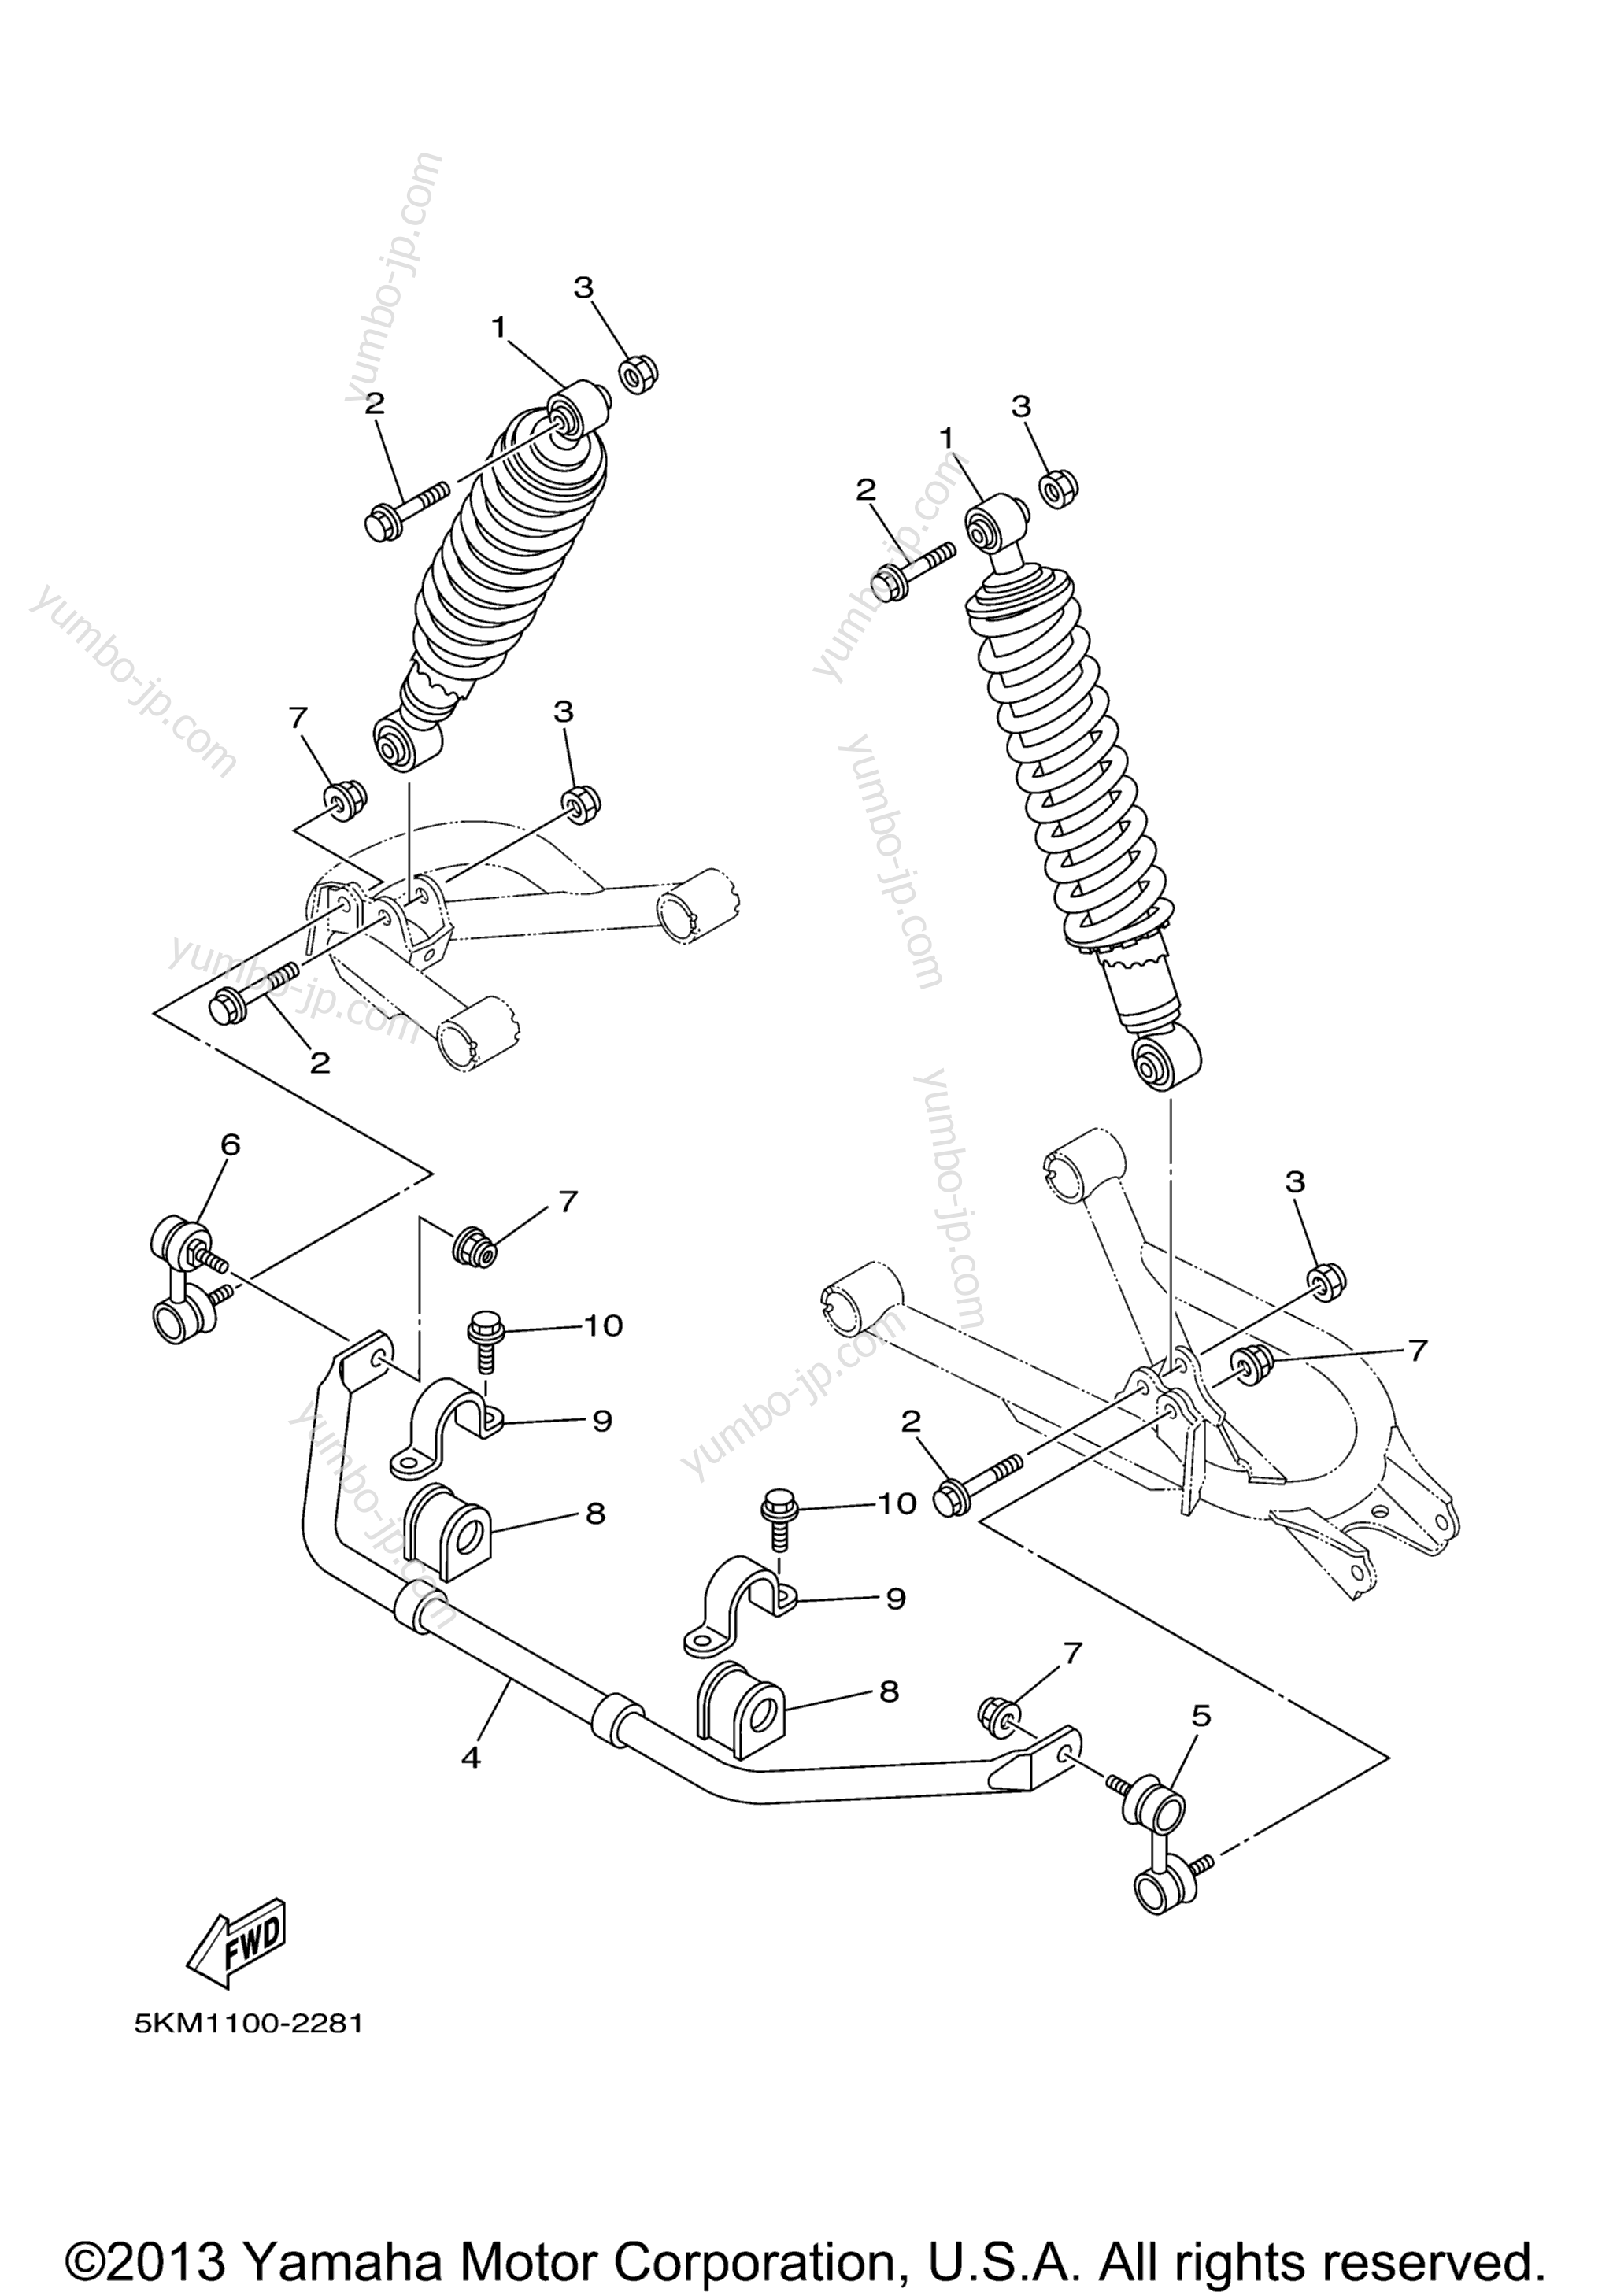 Rear Suspension for ATVs YAMAHA GRIZZLY HUNTER (YFM66FGHW) 2007 year